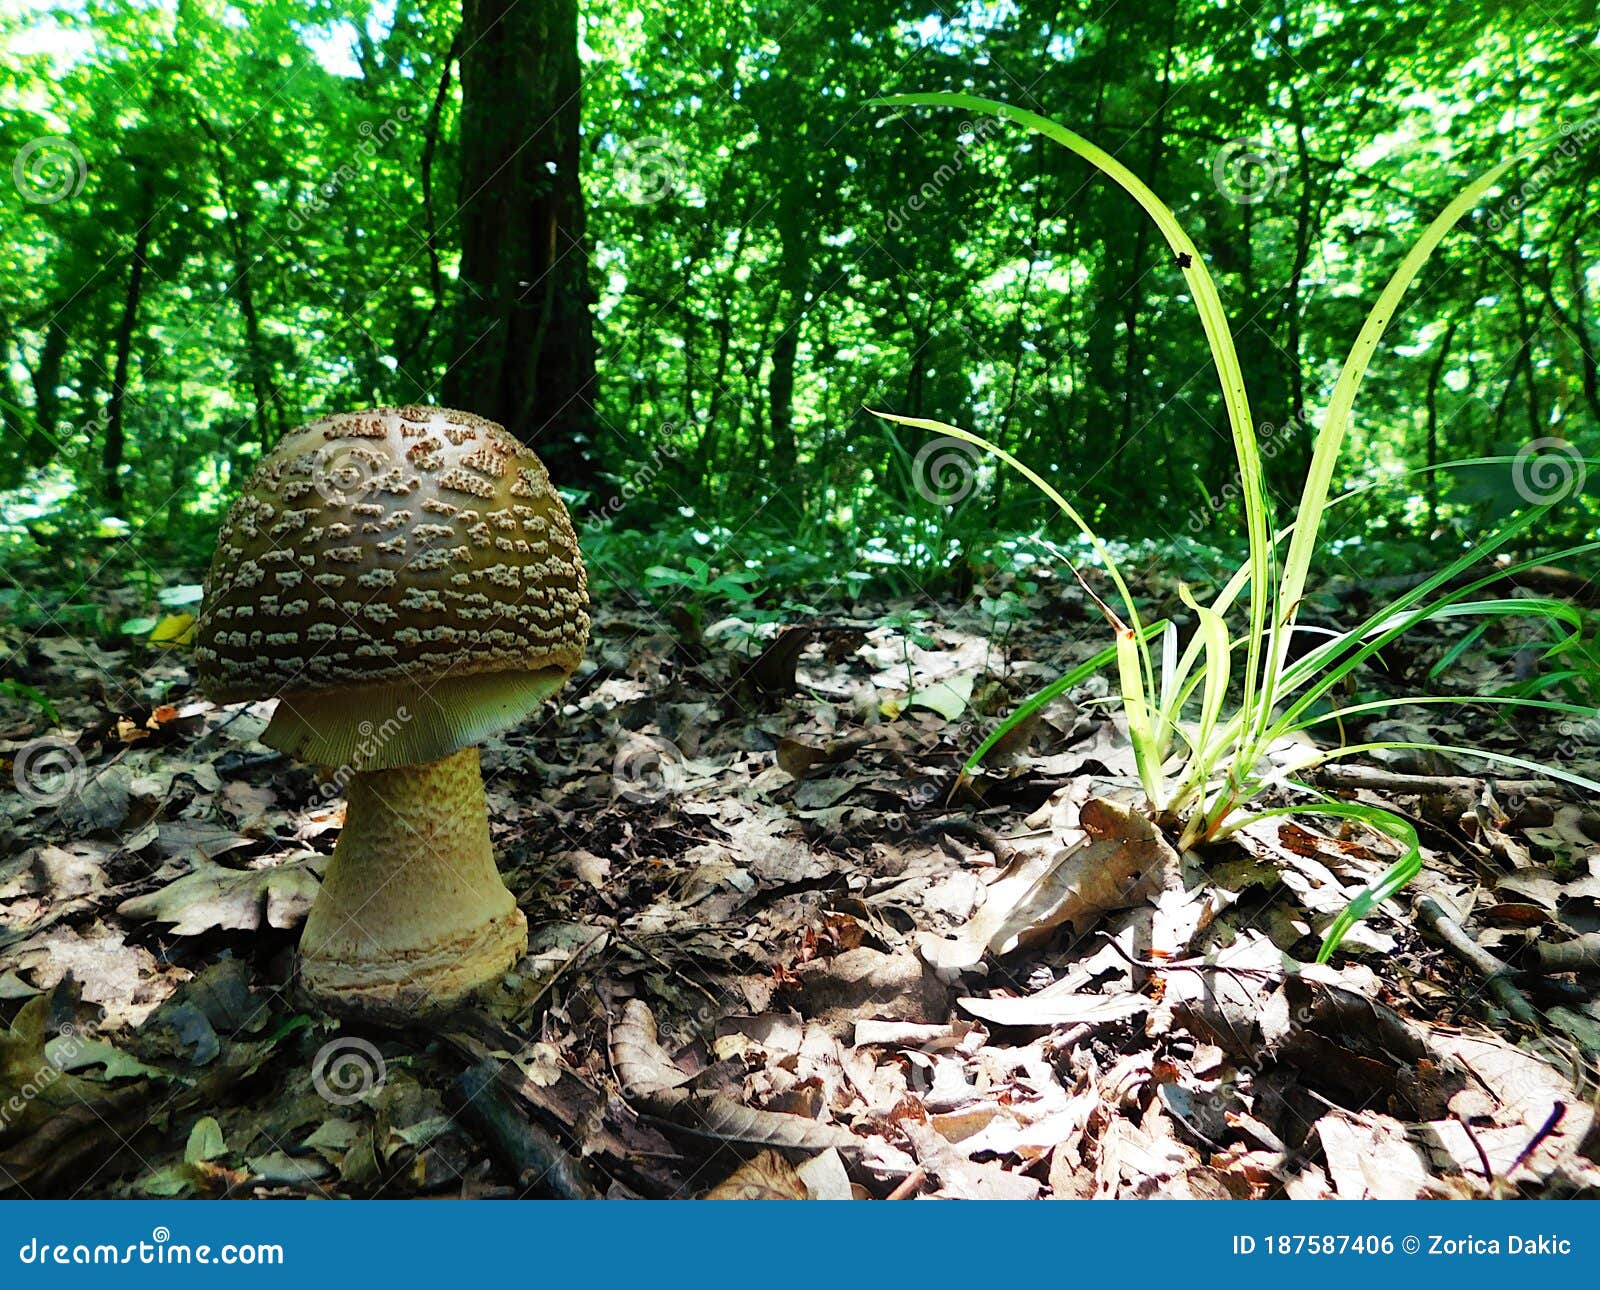 a stable mushroom dominates the forest